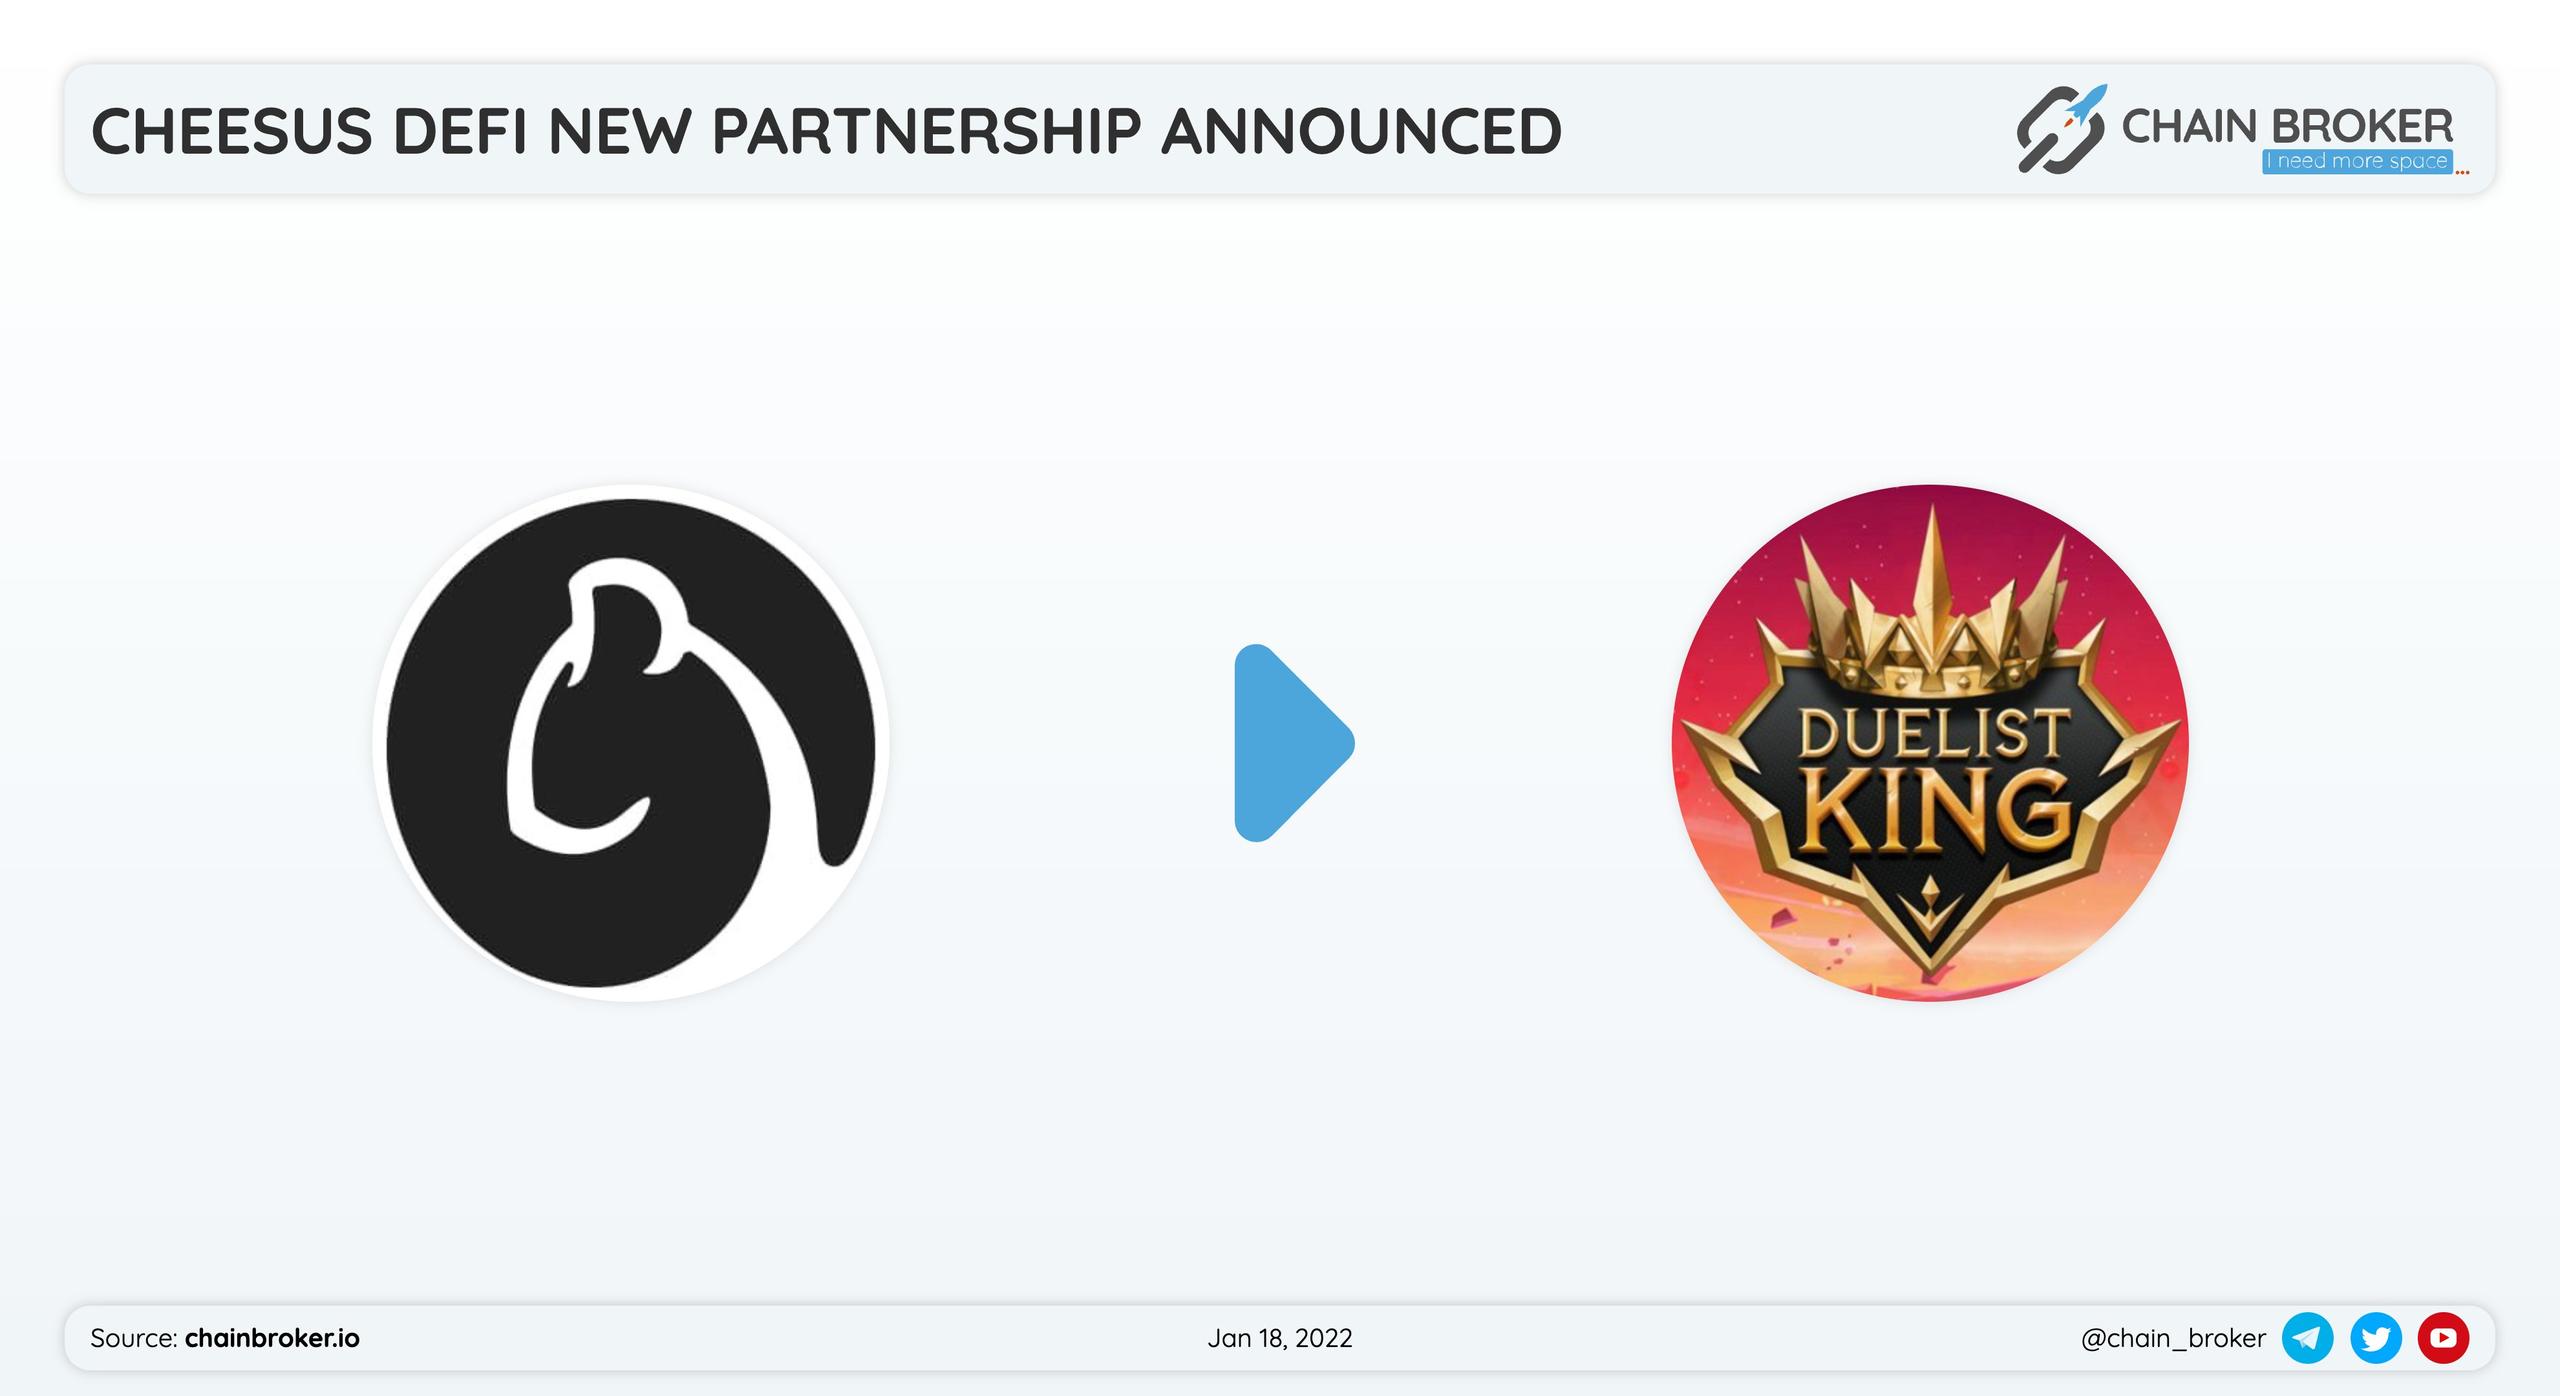 Cheesus has partnered with Duelist King to boost #NFTGame industry.